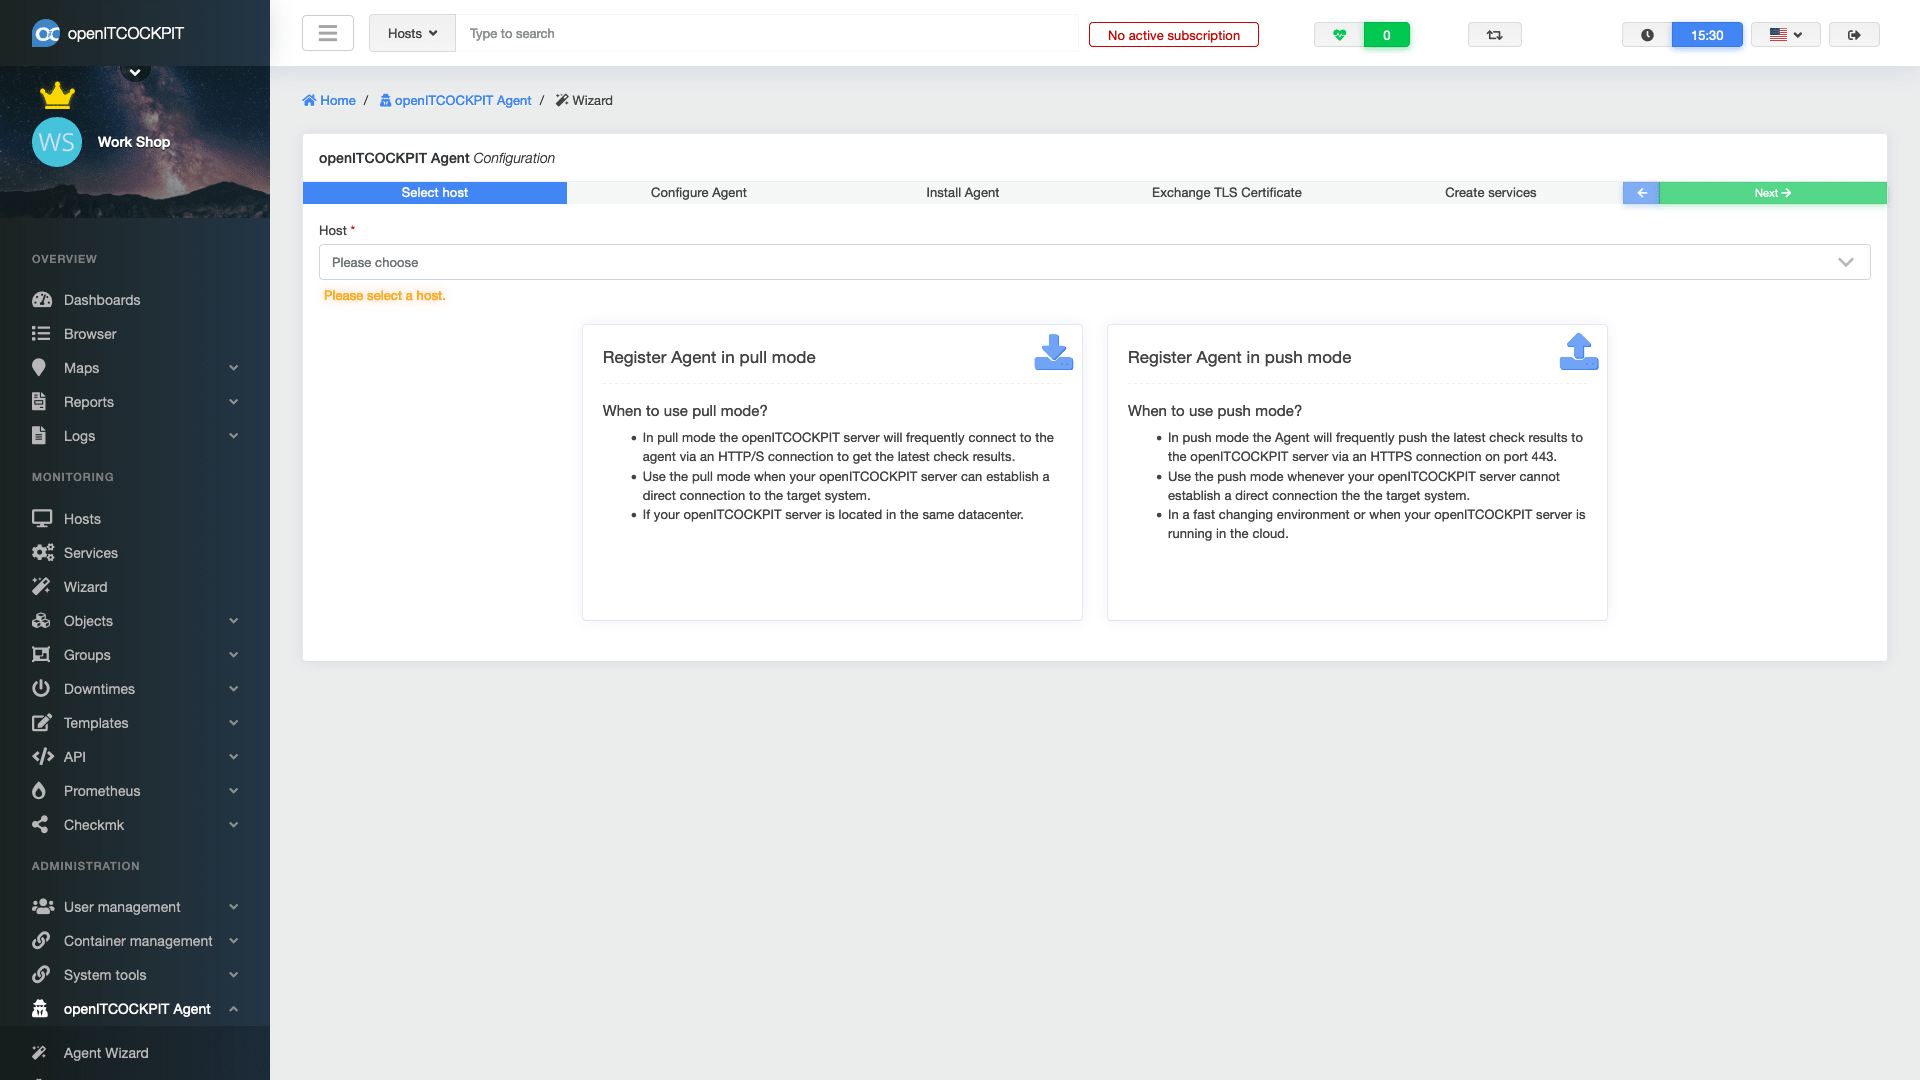 The openITCOCKPIT Monitoring Agent is using secure HTTPS by default and can operate in Pull or Push Mode.